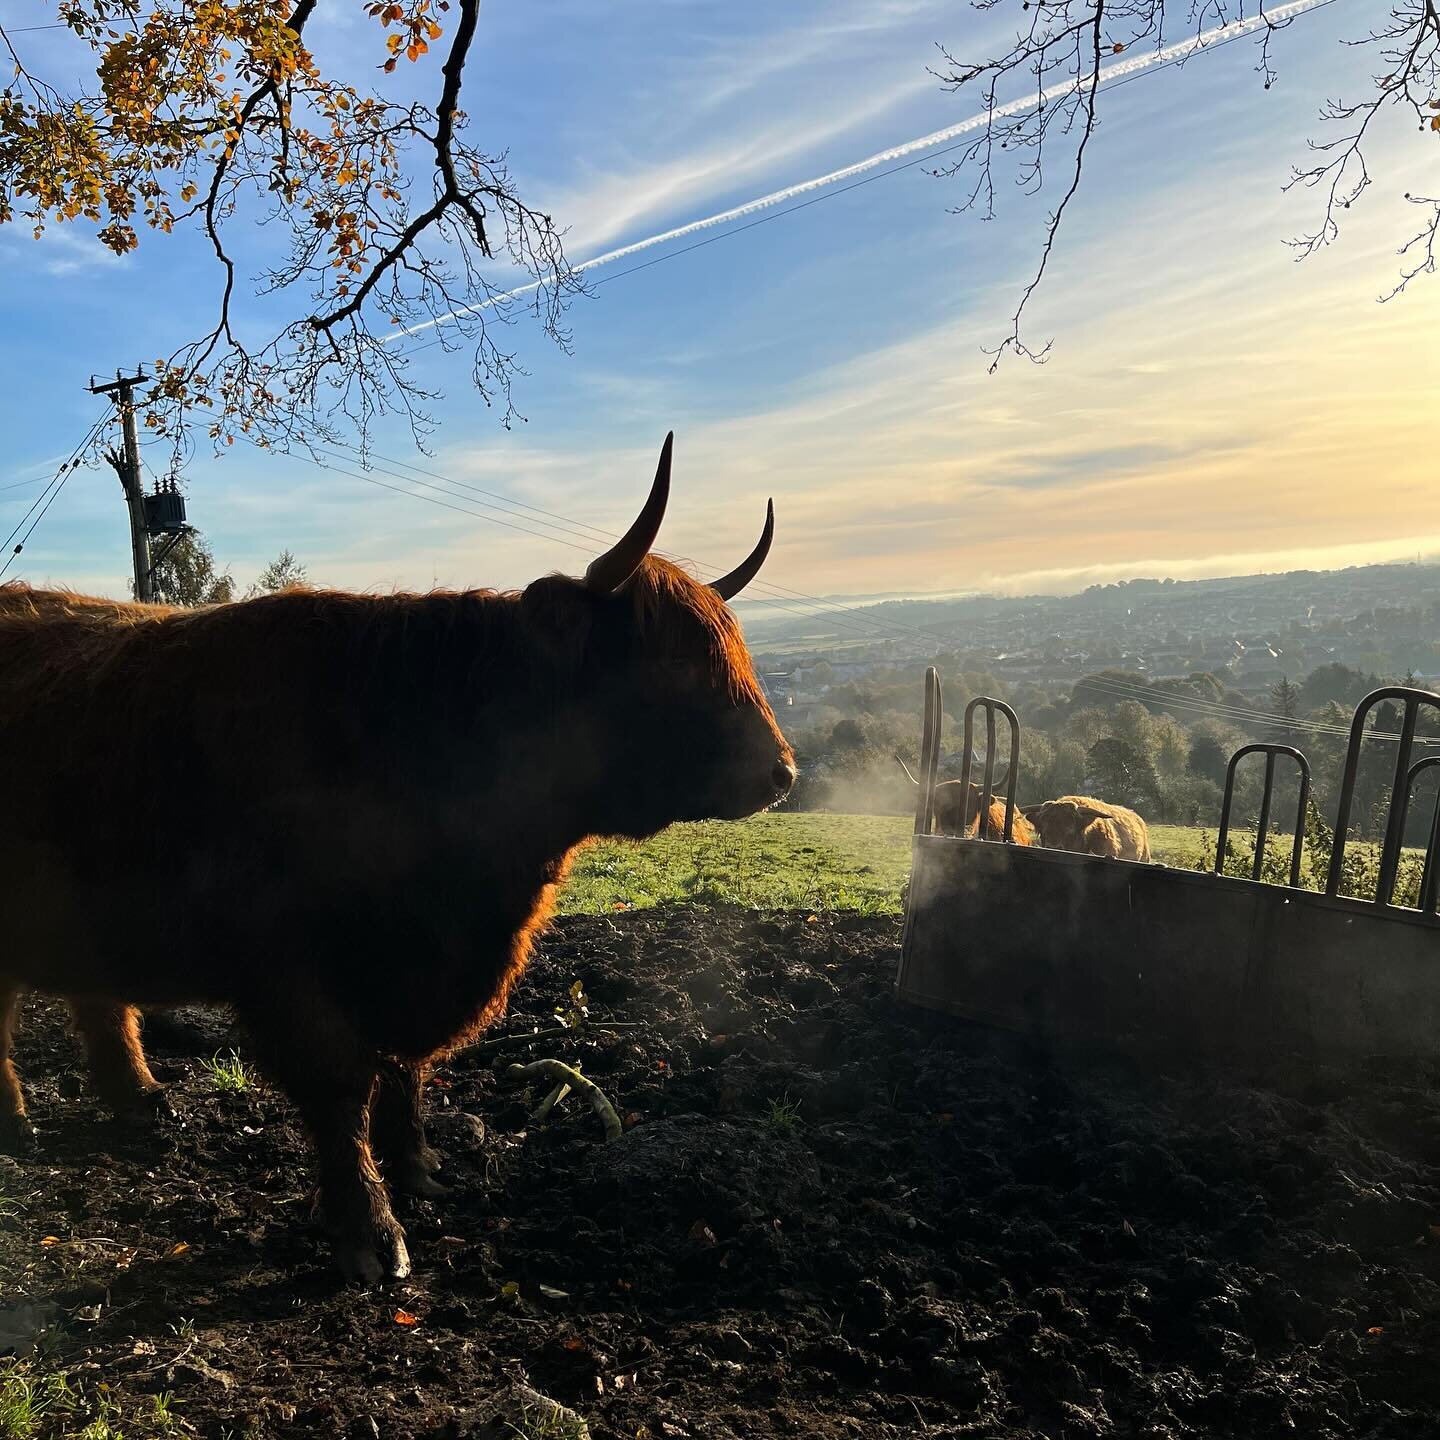 Winter feeding is well underway, Maila is always impatiently waiting for Jock and Bachy to make their way up the field!
&bull;
&bull;
&bull;
&bull;
#highlandcow #highlandcows #highlandcattle  #highlander #shorthorn #calf #calvingseason #calving #cow 